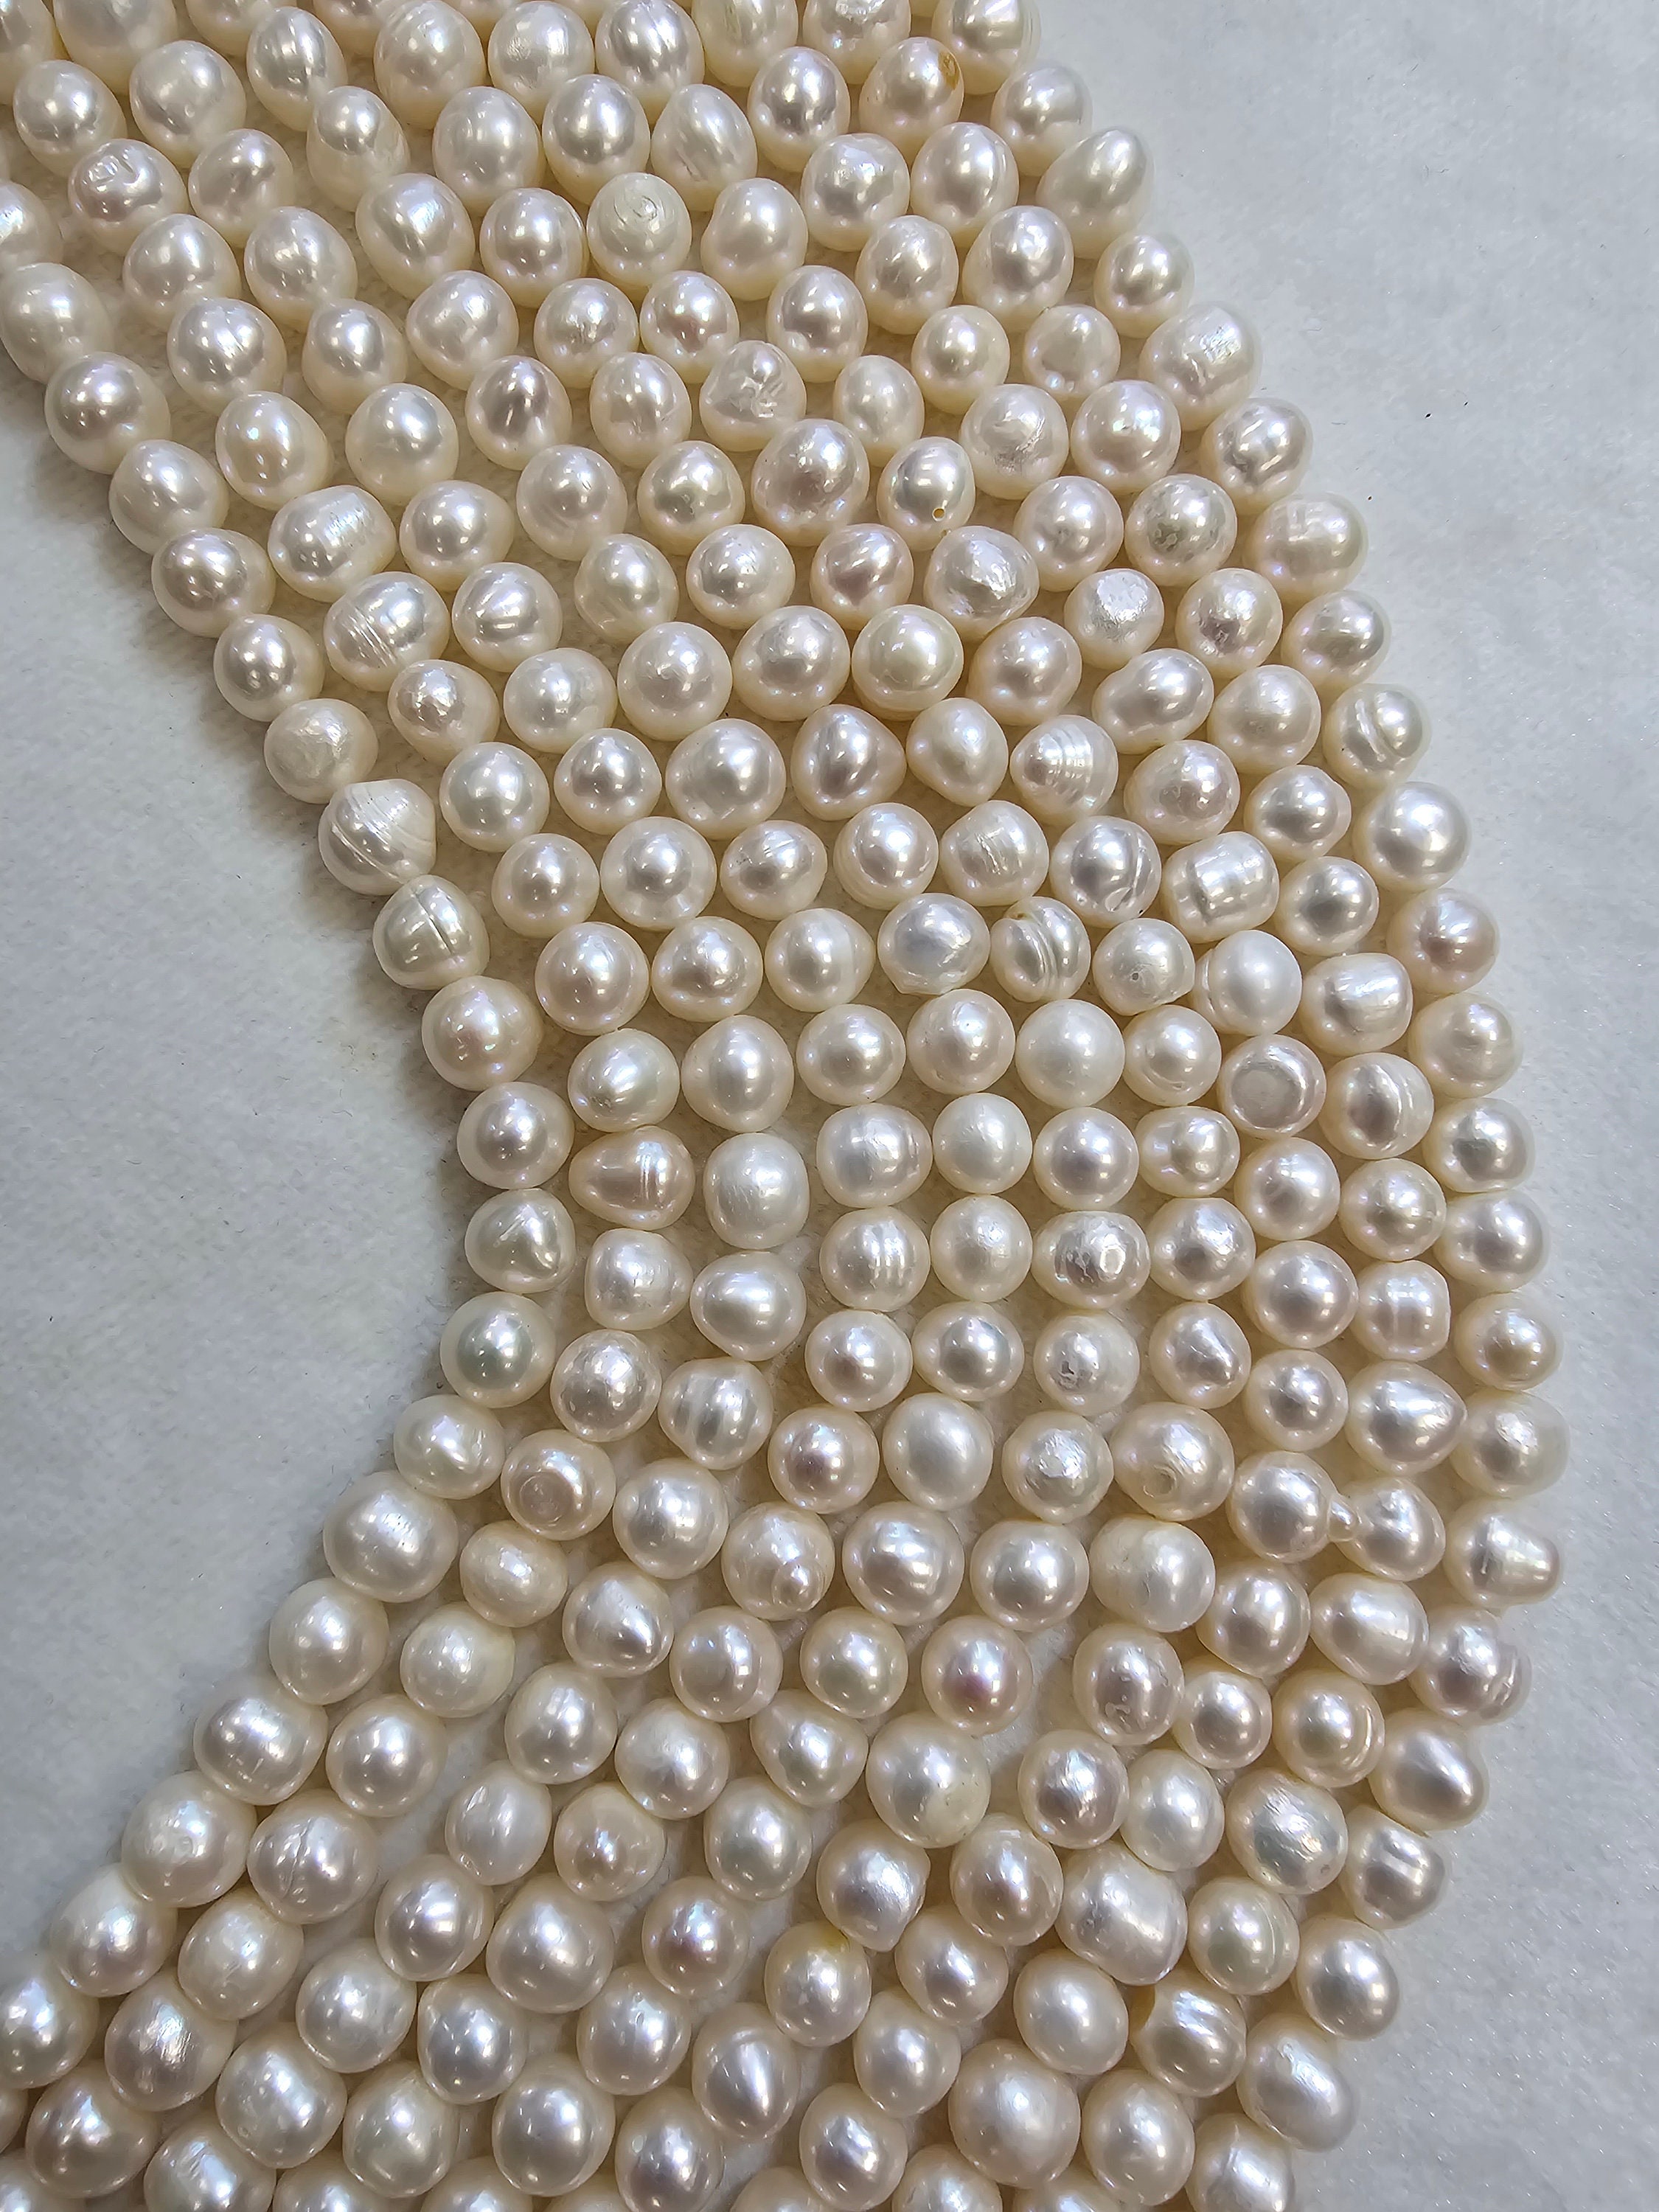 100 Gold Angel Pony Beads Mix 6mmx9mm Gold Silver White Pearl Glitter Hair  Dummy Clip Jewellery Loom Bands Crafts 